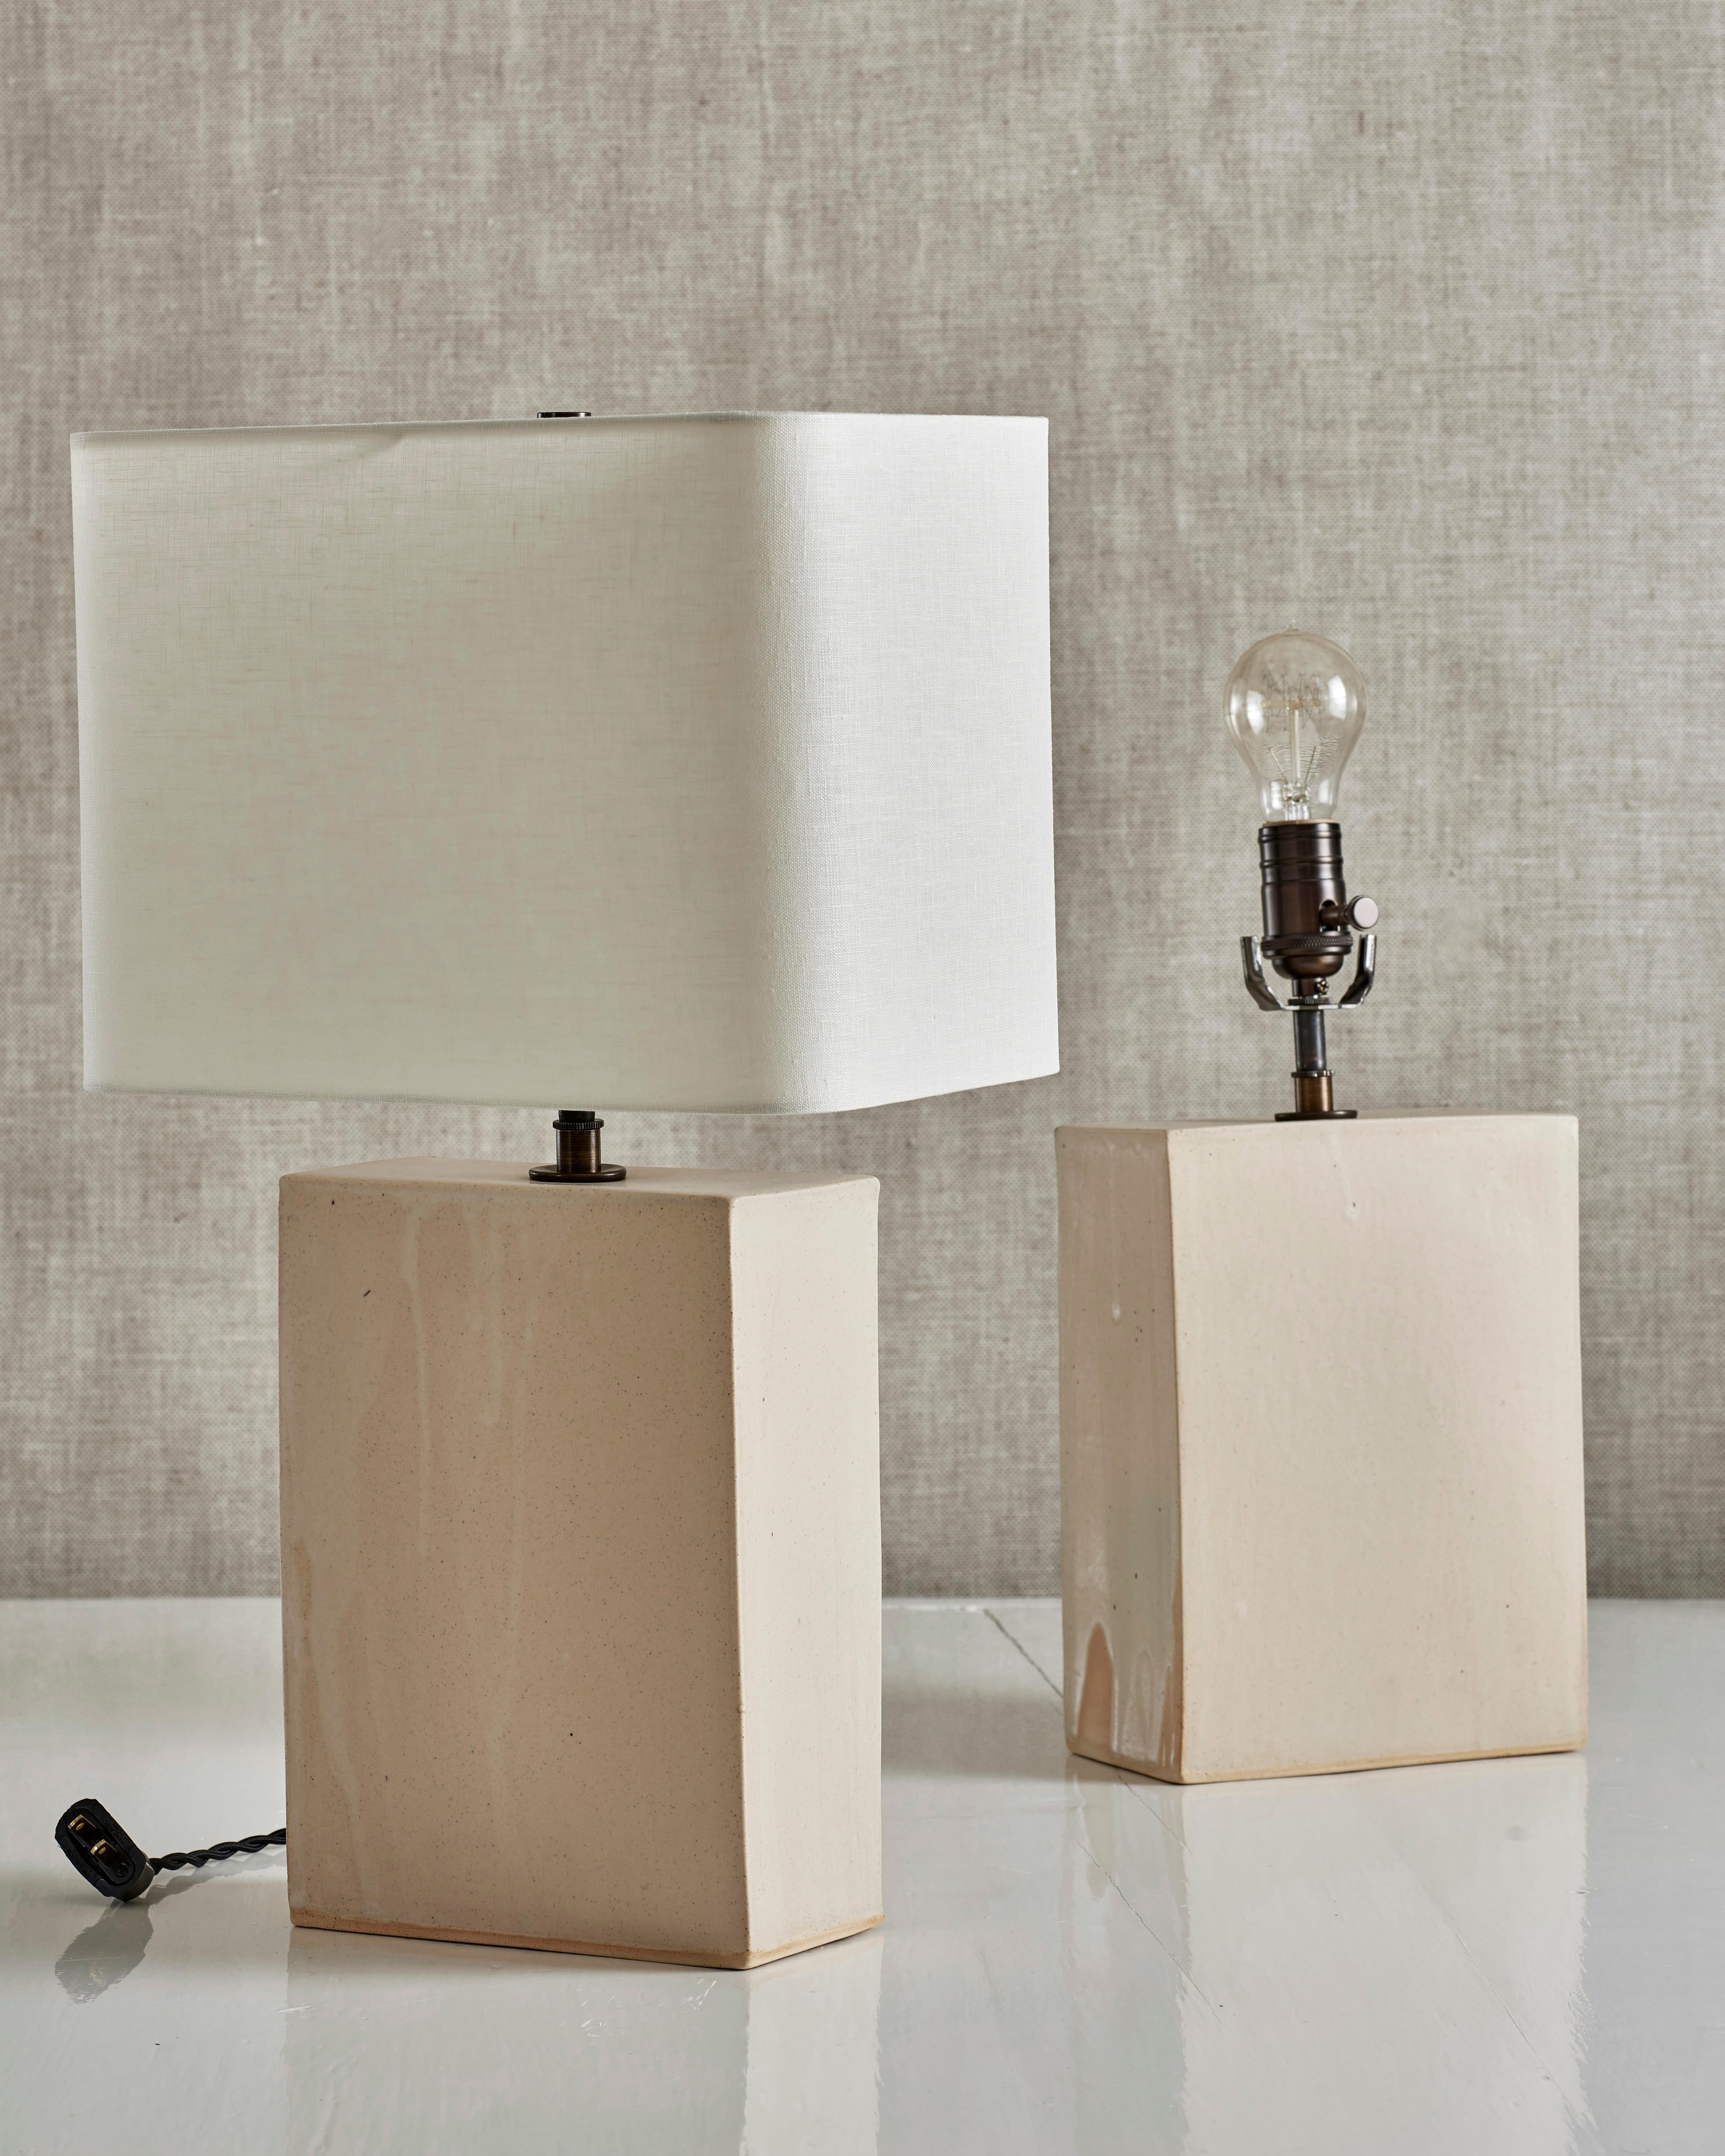 Handmade stoneware slab construction. Lamps are individually crafted and one of a kind.

Matte clear glaze over white stoneware. Antique brass fittings with braided black silk cord and off-white linen shade.

Measures: Box height 10.5”
Box